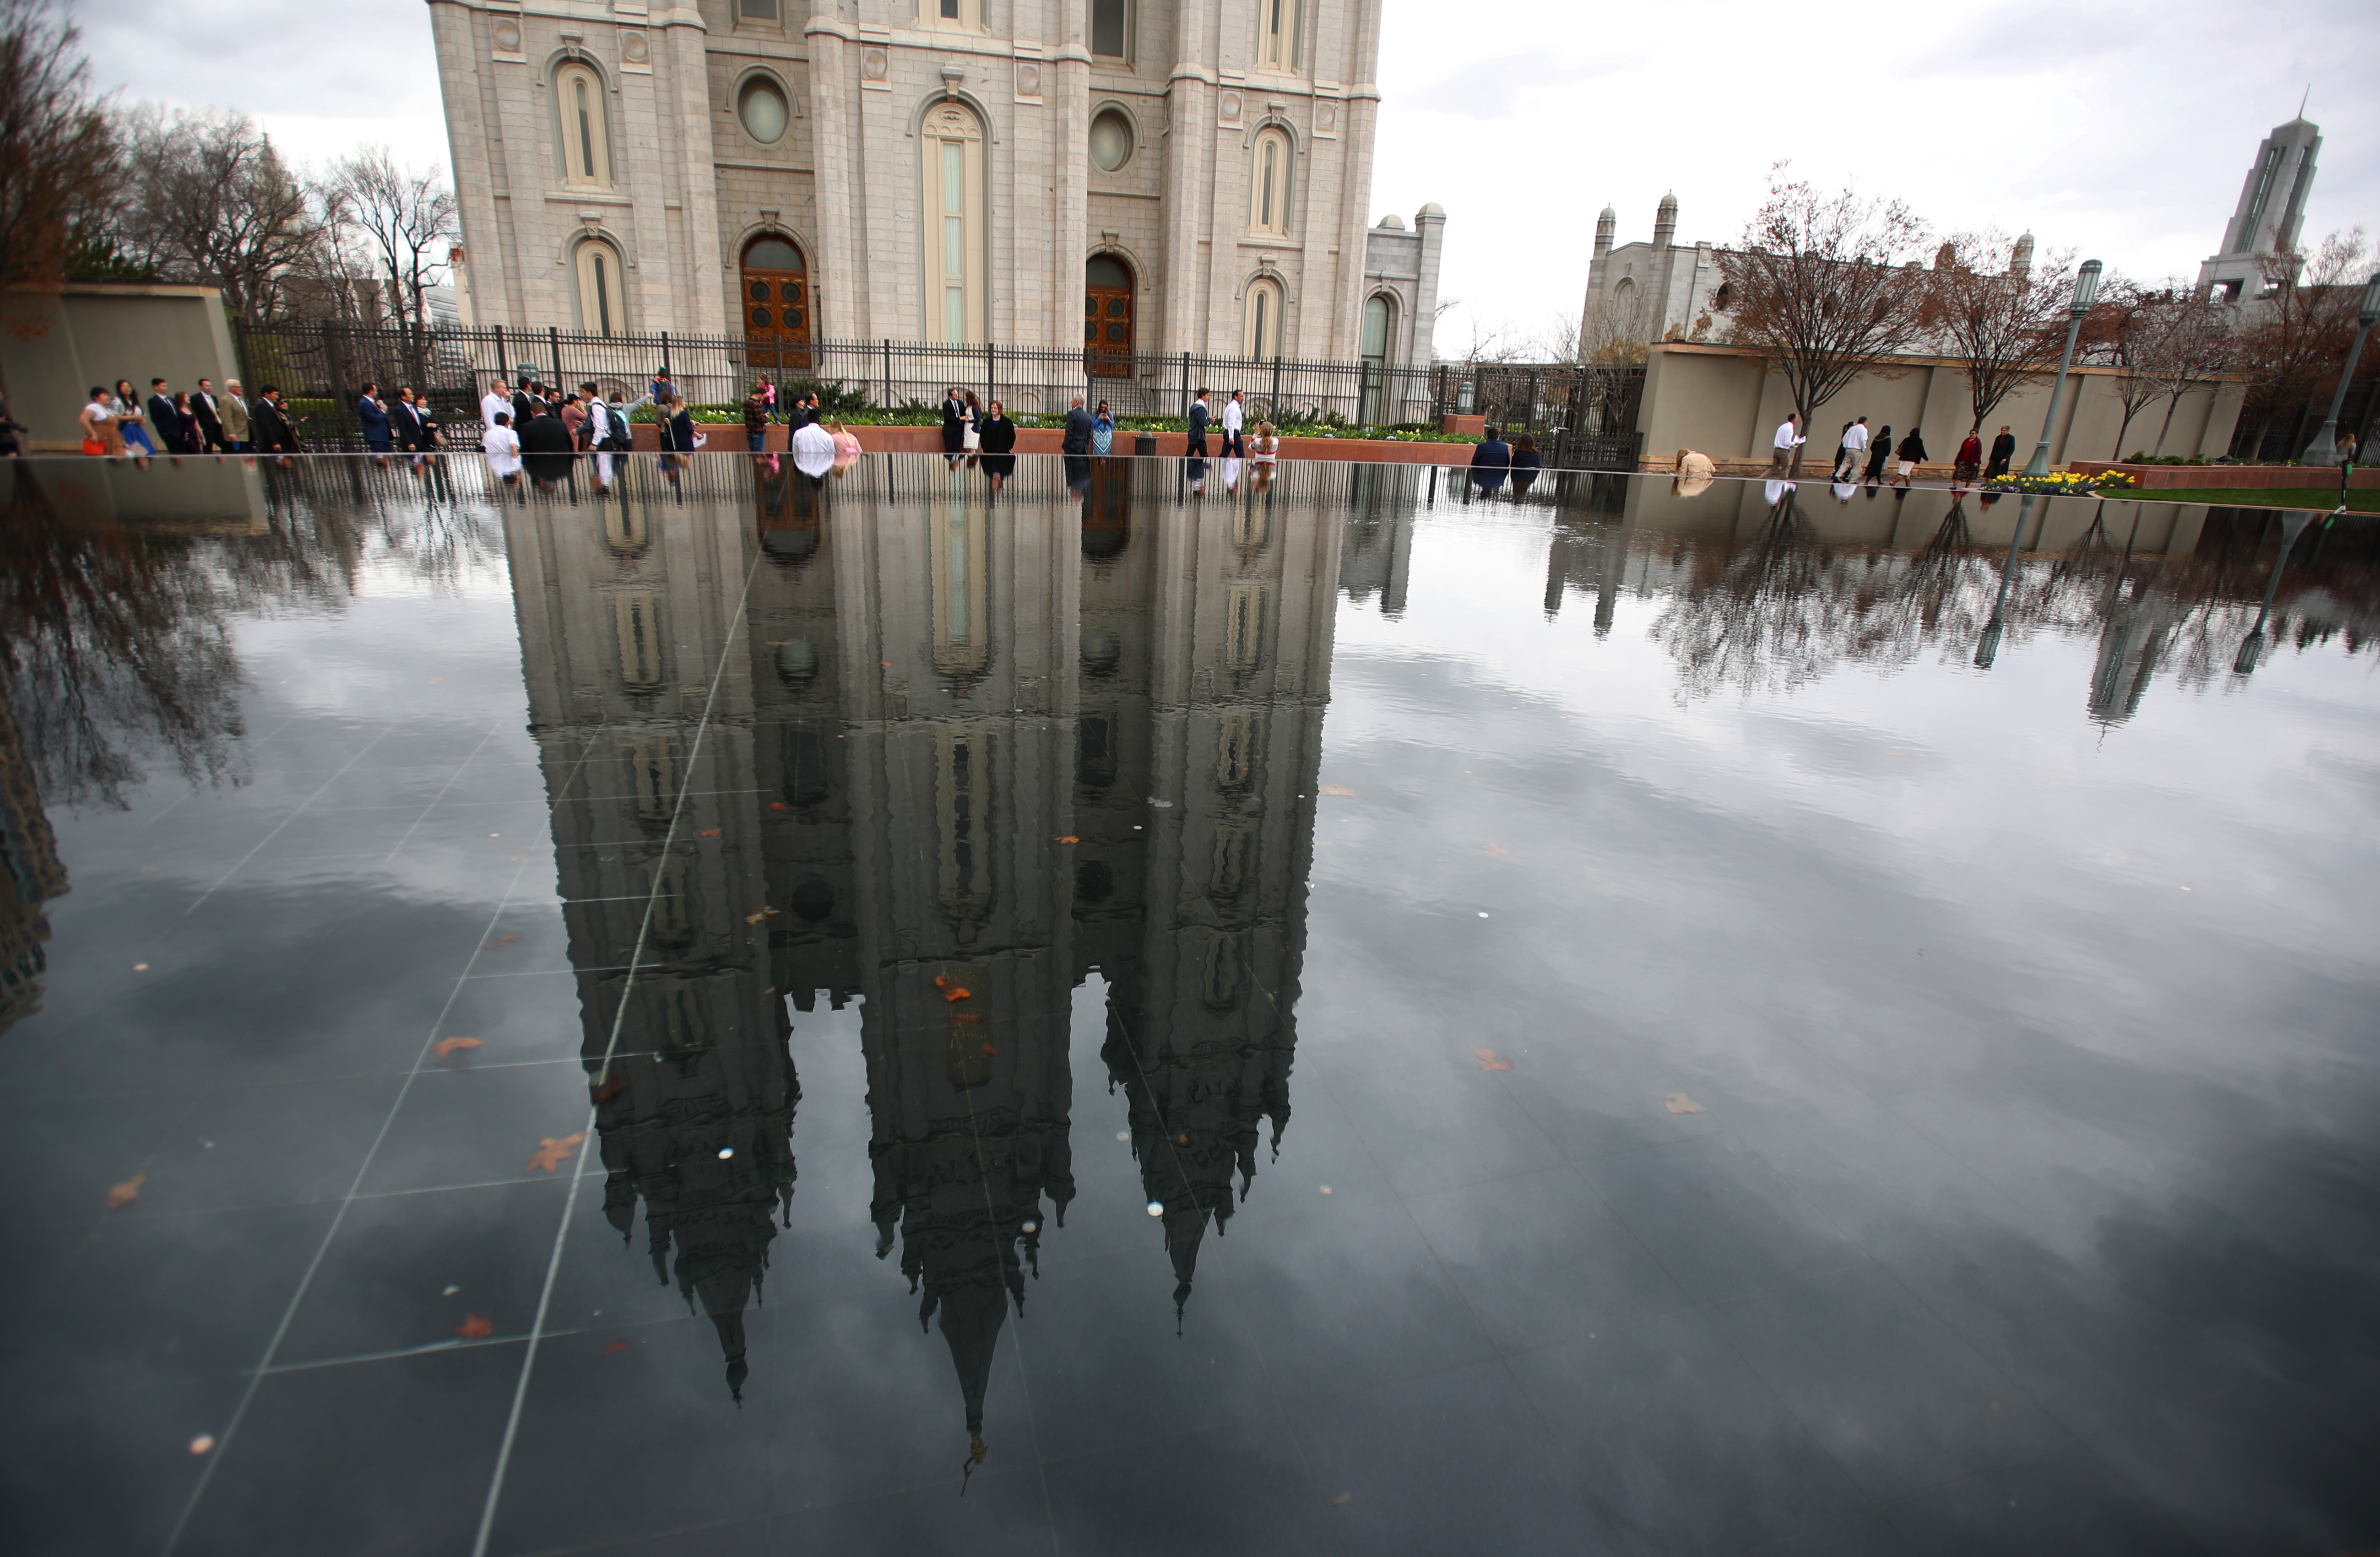 People walk past a reflection pool and the historic Salt Lake Temple of the Church of Jesus Christ of Latter-Day Saints in Salt Lake City, Utah.